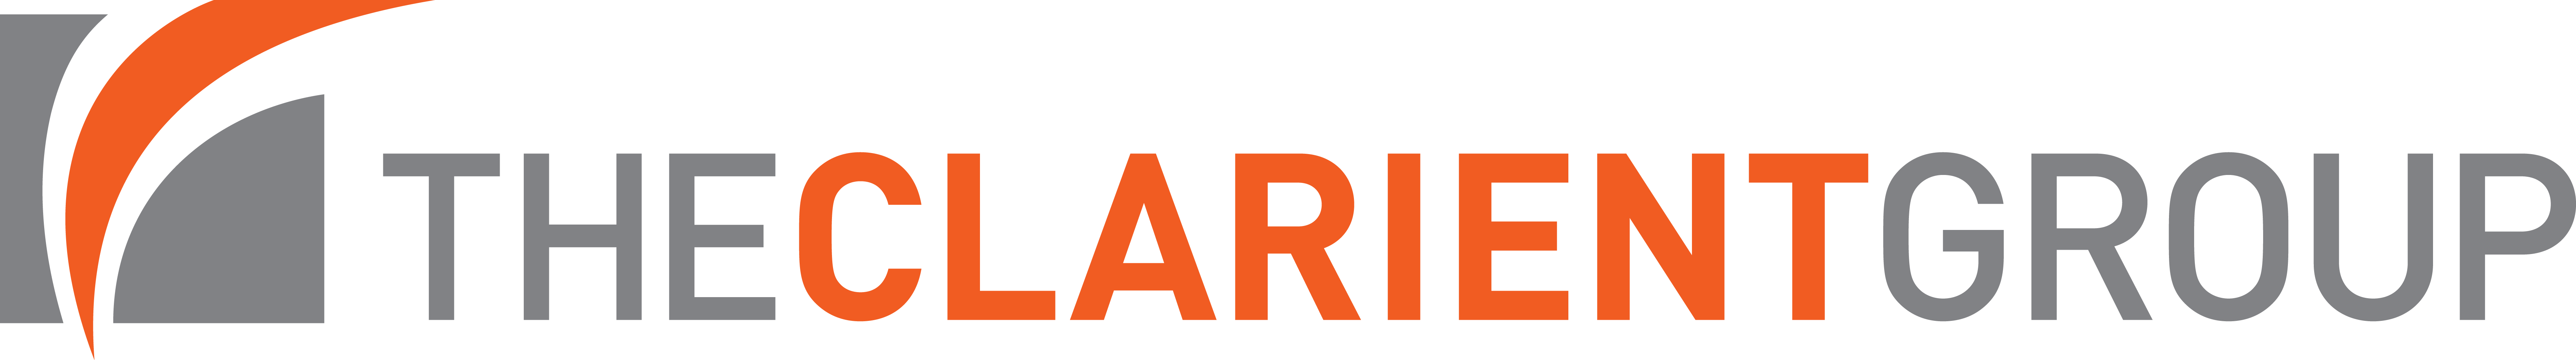 The Clarient Group Logo